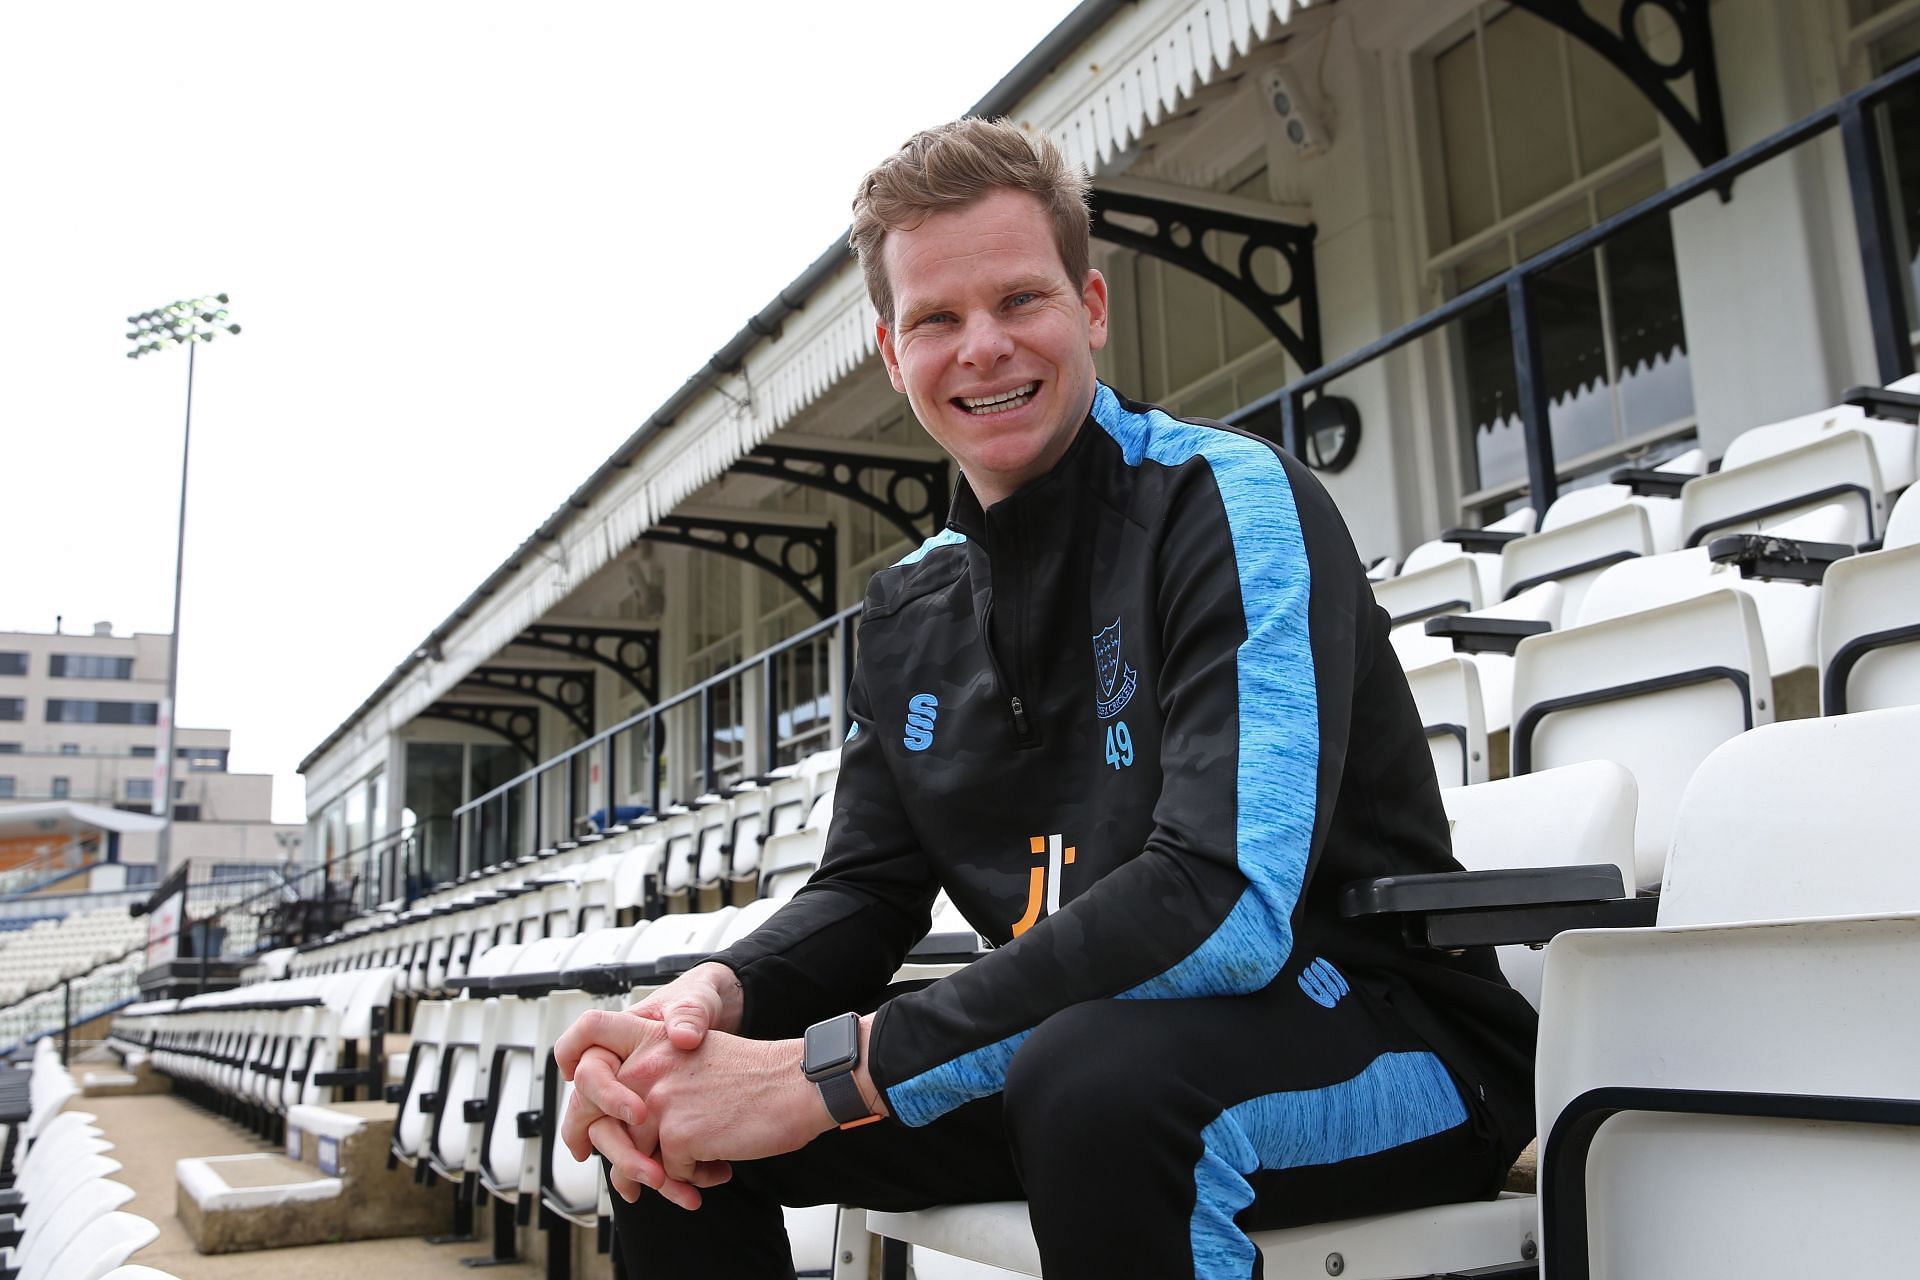 Steve Smith Joins Sussex CCC